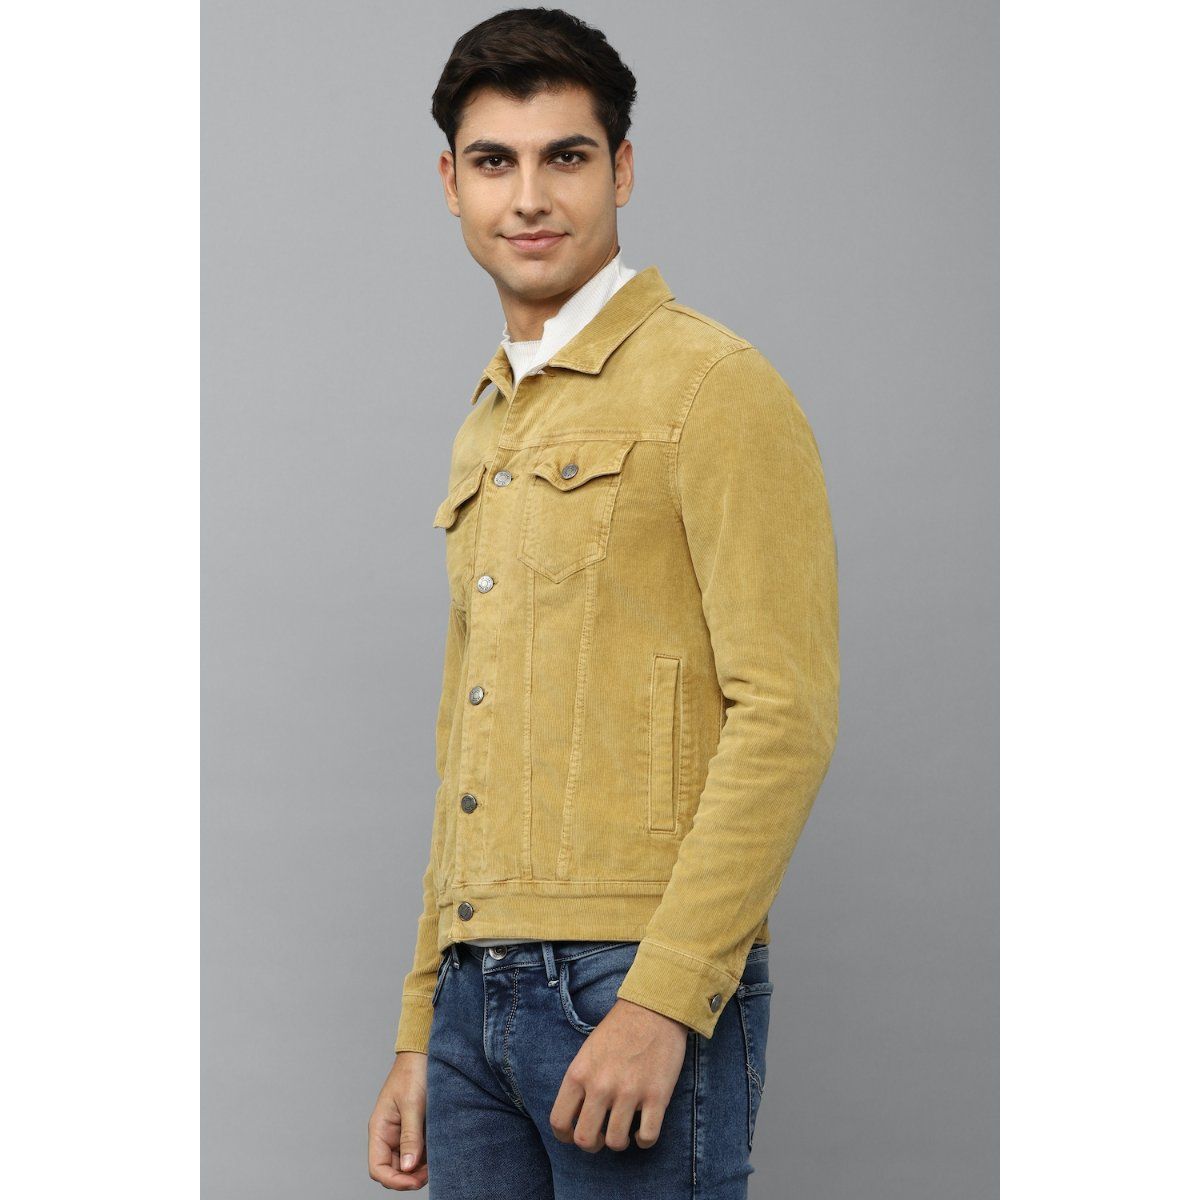 LP Jeans Jackets, Louis Philippe Grey Jacket for Men at Louisphilippe.com